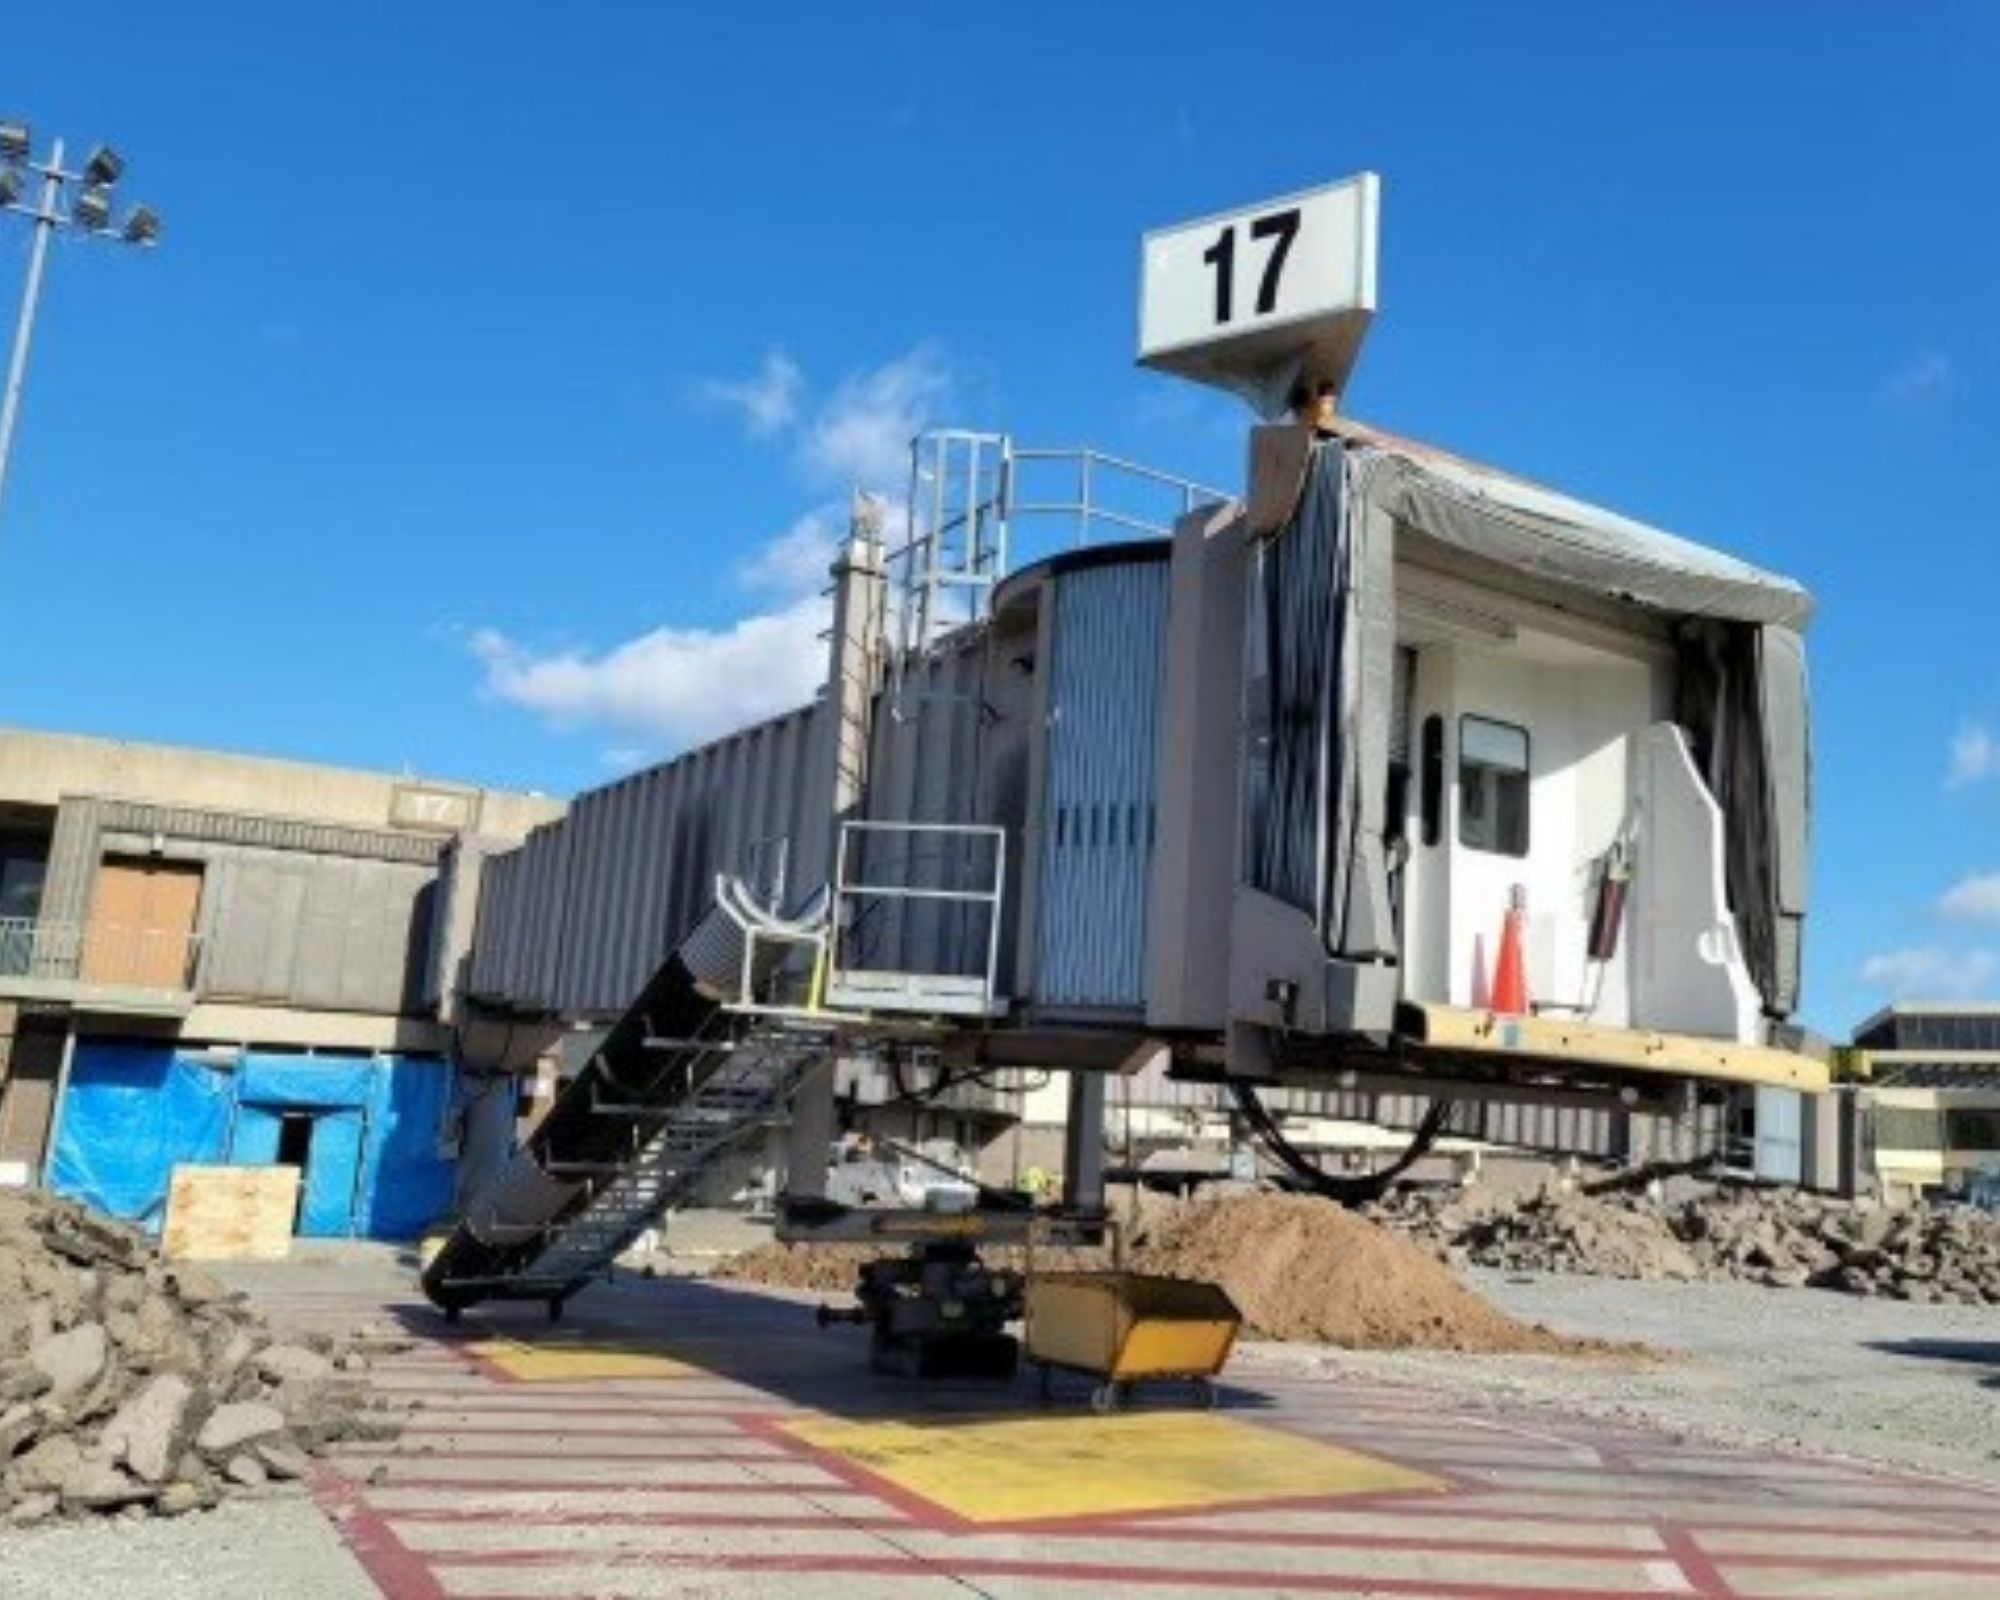 An airport gateway - with a sign that says "17" - sits amid rubble